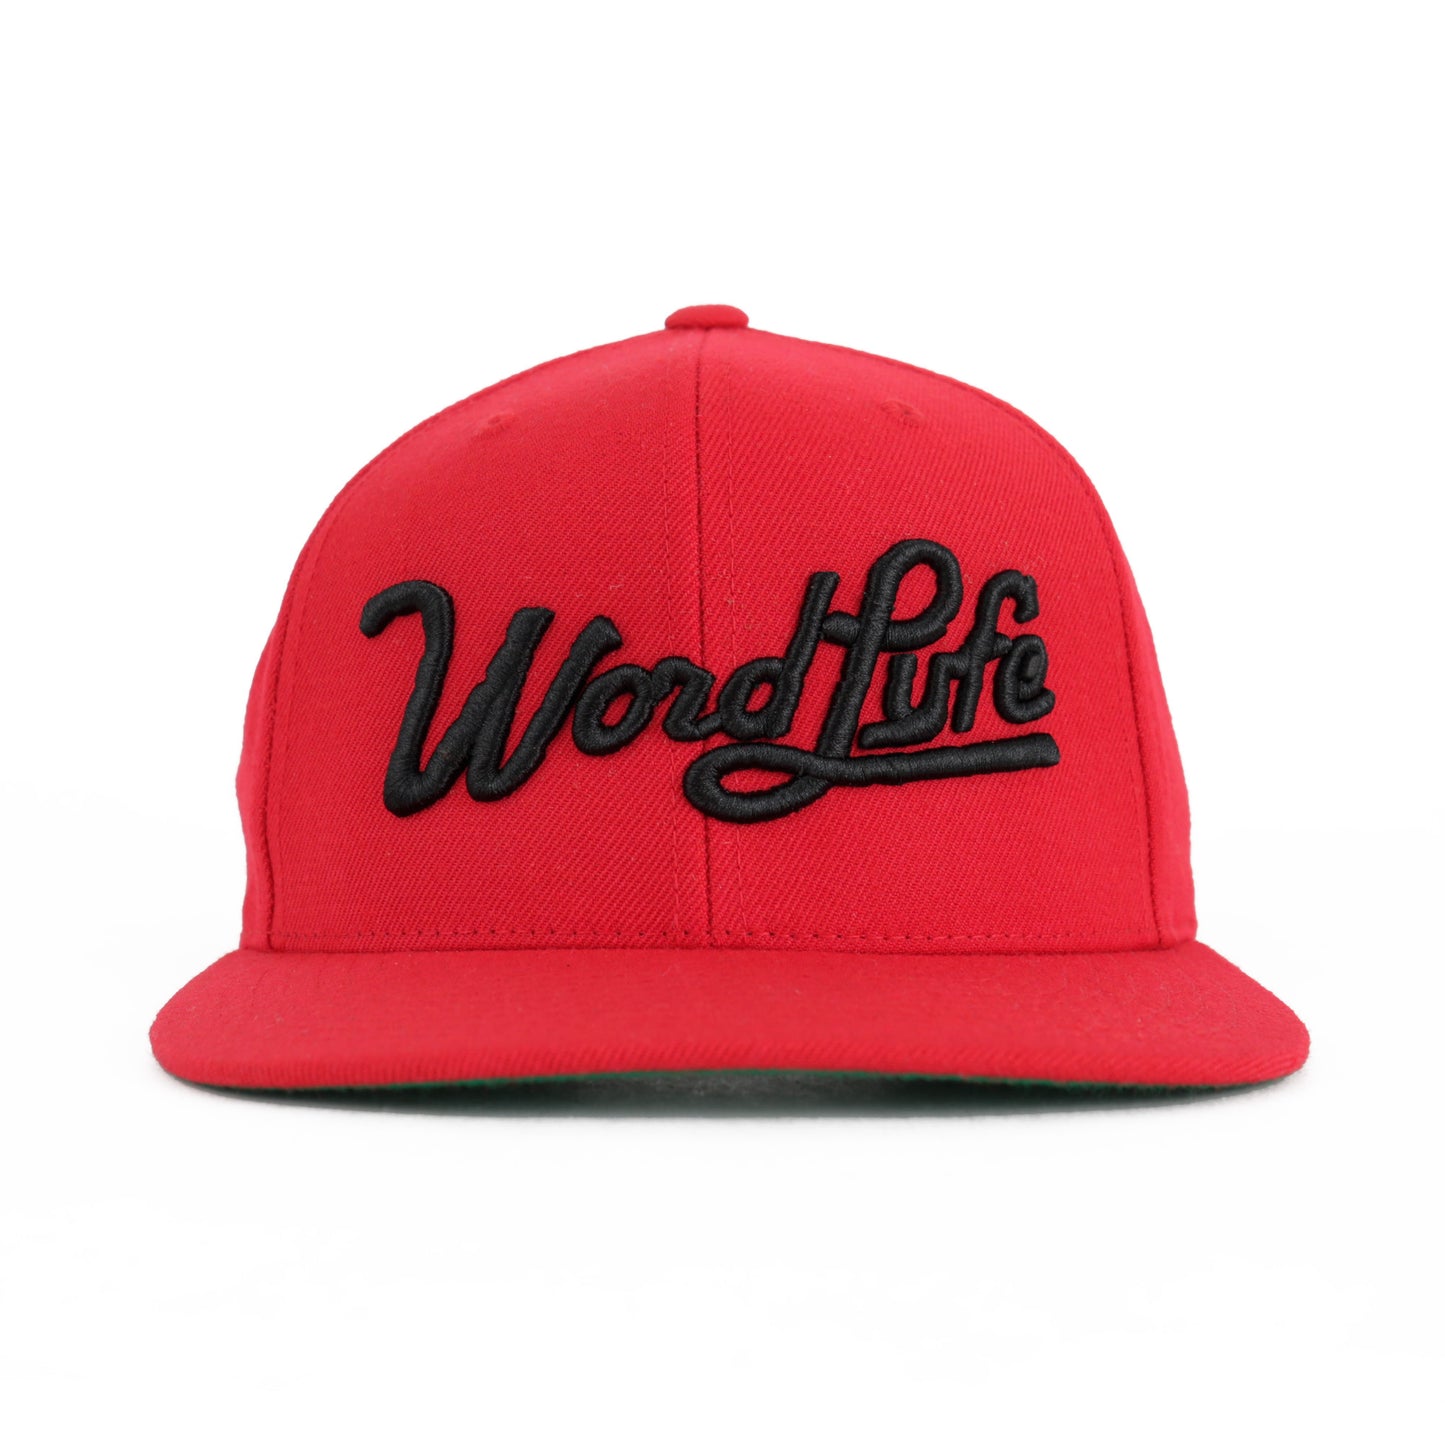 WORDLYFE SNAPBACK LIMITED EDITION "SELECTA" (RED/BLACK)